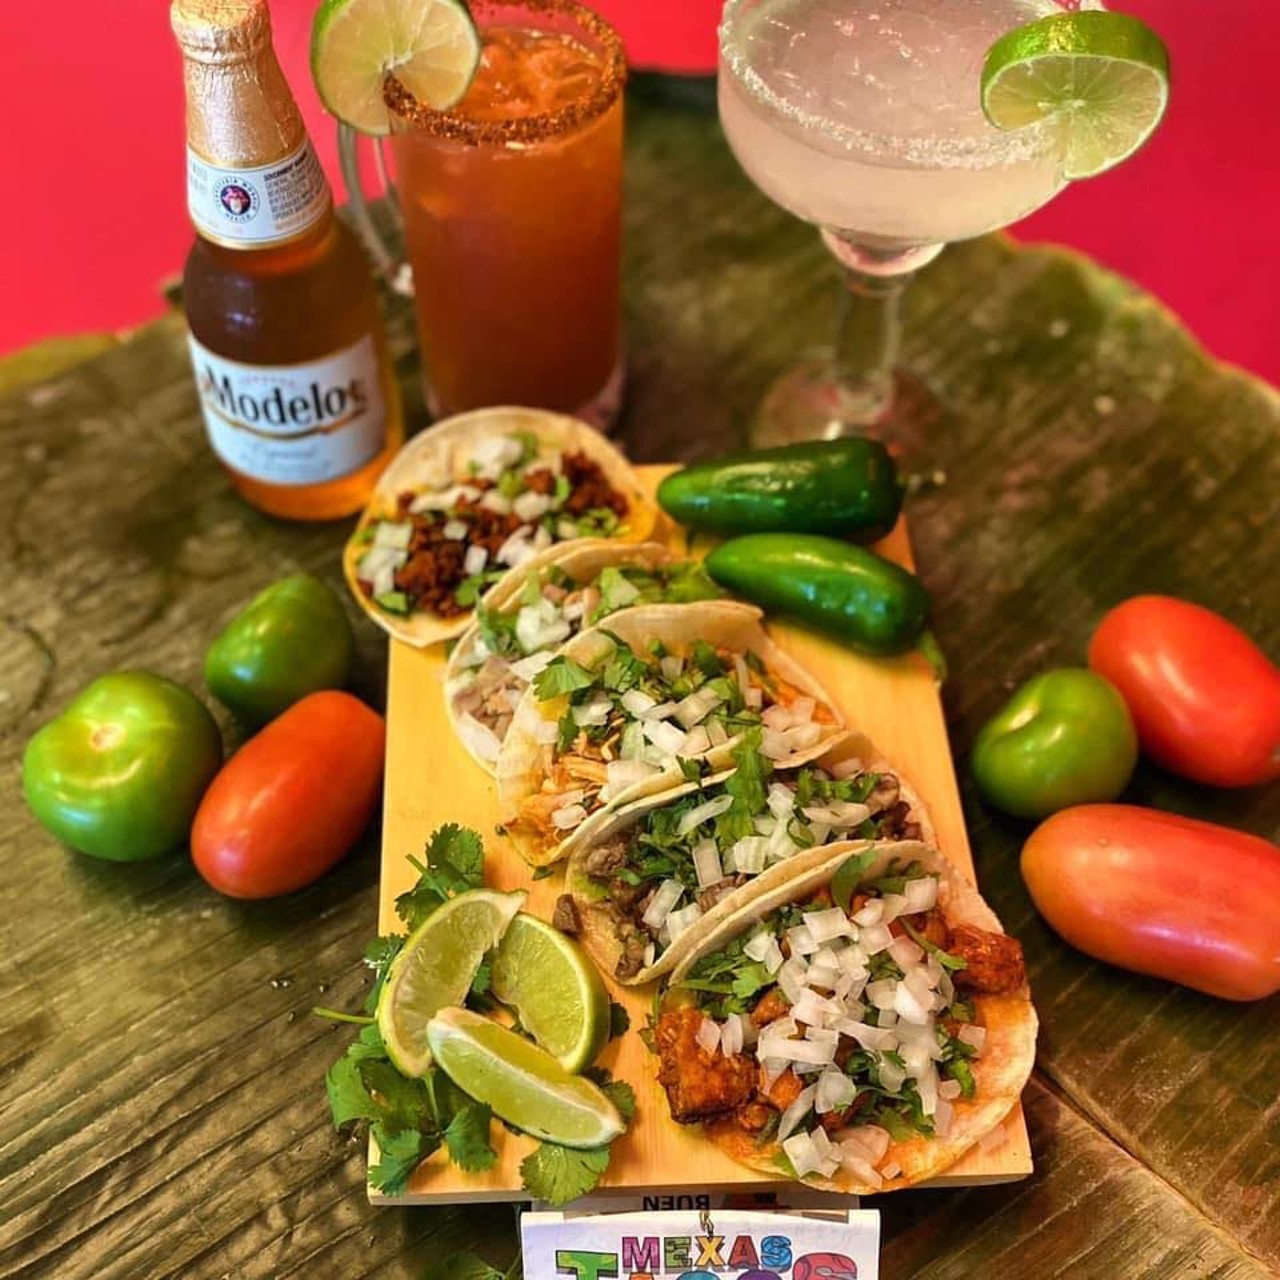 Mexas Tacos 
8788 Vineland Ave, Orlando, FL 32821, (407) 560-0773
If you are looking to have delicious antojitos traditionally from Mexico, this is the place to go. A 3 taco combo with an agua fresca is just $8.99
Photo via Mexas Tacos/Facebook8788 Vineland Ave, Orlando, FL 32821, (407) 560-0773
If you are looking to have delicious antojitos traditionally from Mexico, this is the place to go. You can get a 3 tacos combo and an agua fresca for $8.99
Photo via Mexas Tacos/Facebook